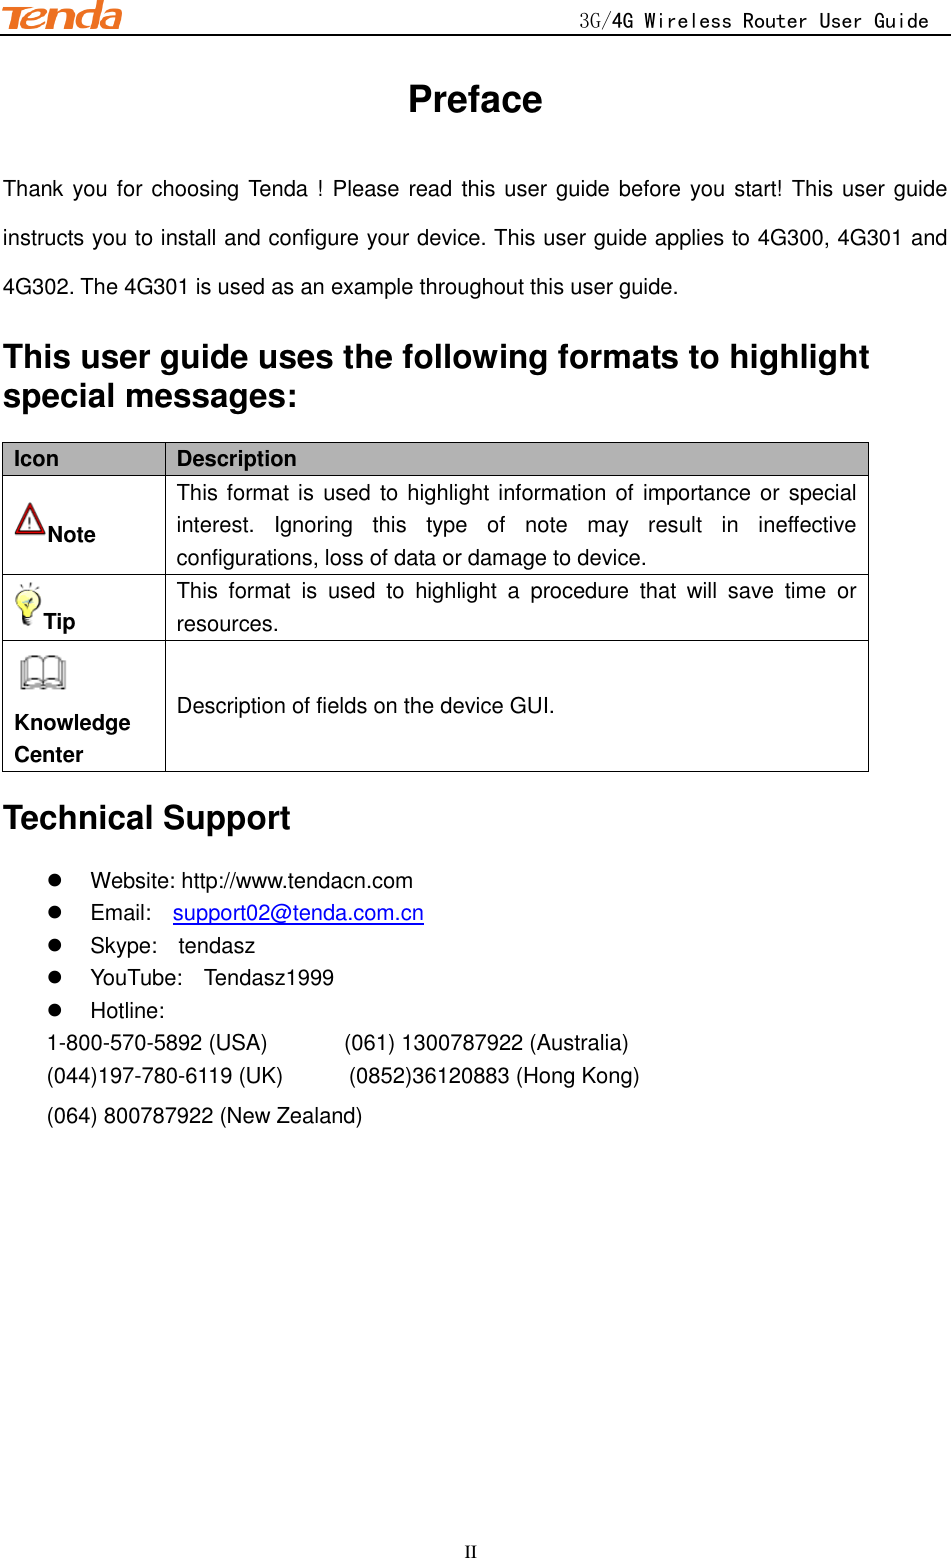                                                    3G/4G Wireless Router User Guide    II Preface Thank you for choosing Tenda ! Please read this user guide before you start! This user guide instructs you to install and configure your device. This user guide applies to 4G300, 4G301 and 4G302. The 4G301 is used as an example throughout this user guide. This user guide uses the following formats to highlight special messages: Icon Description Note This format is  used to highlight information of importance or special interest.  Ignoring  this  type  of  note  may  result  in  ineffective configurations, loss of data or damage to device. Tip This  format  is  used  to  highlight  a  procedure  that  will  save  time  or resources.  Knowledge Center Description of fields on the device GUI. Technical Support   Website: http://www.tendacn.com   Email:    support02@tenda.com.cn   Skype:    tendasz   YouTube:    Tendasz1999   Hotline:   1-800-570-5892 (USA)              (061) 1300787922 (Australia)     (044)197-780-6119 (UK)            (0852)36120883 (Hong Kong)   (064) 800787922 (New Zealand) 